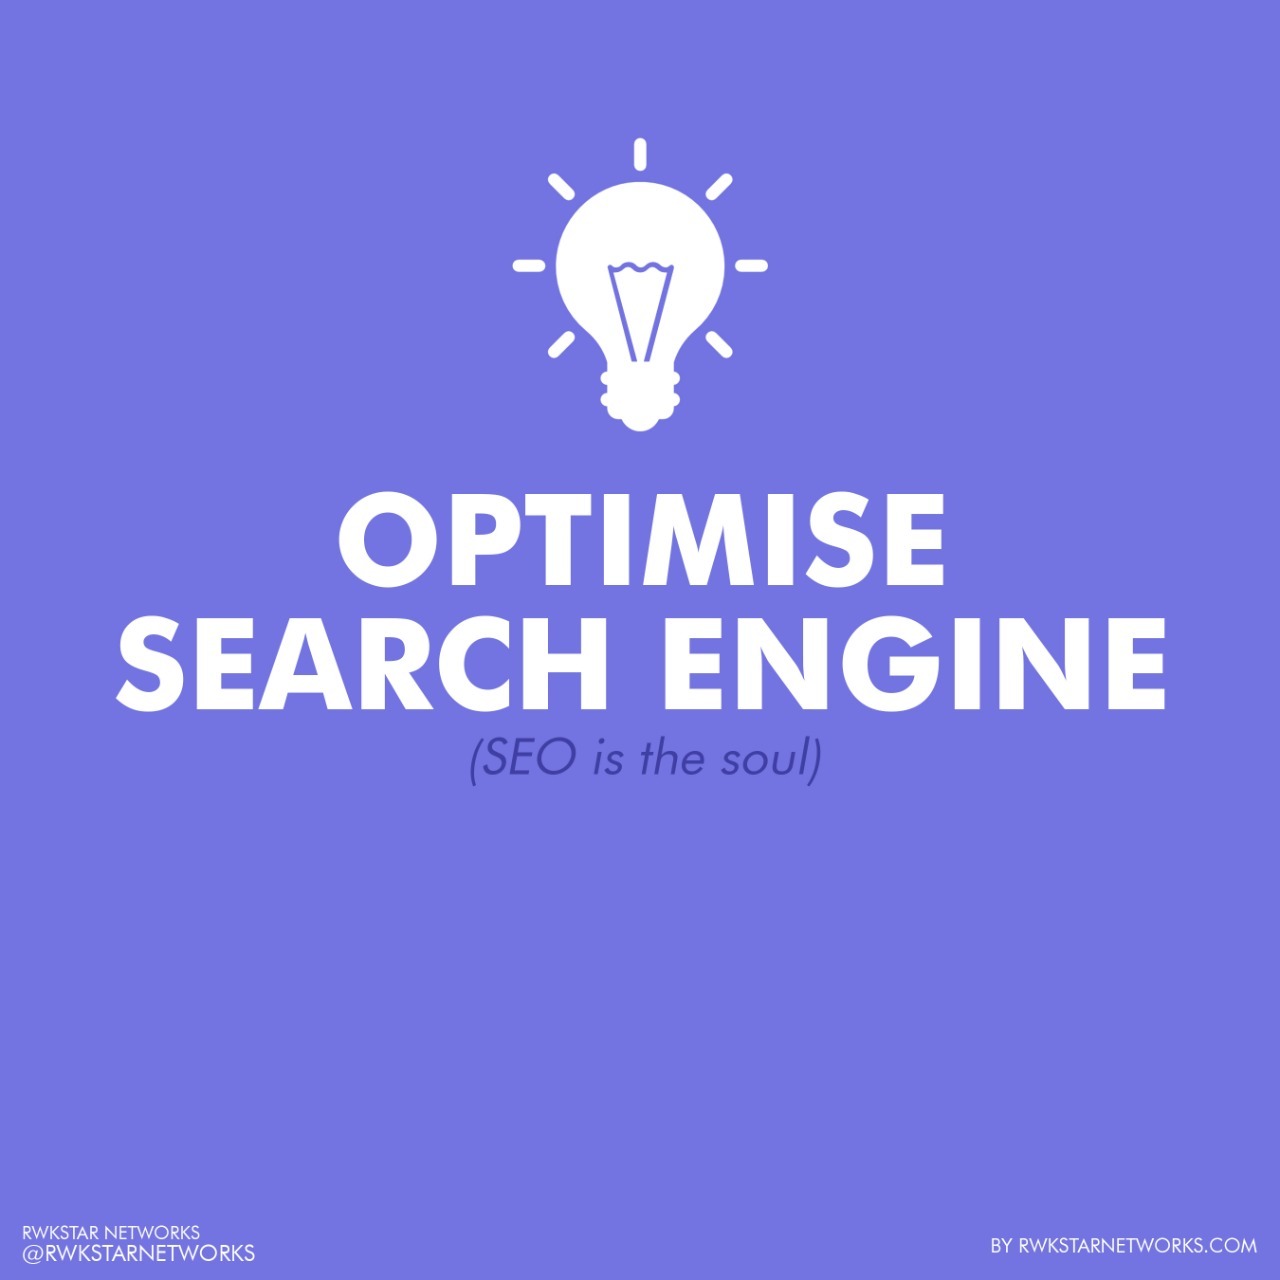 Search Engine & increase website traffic